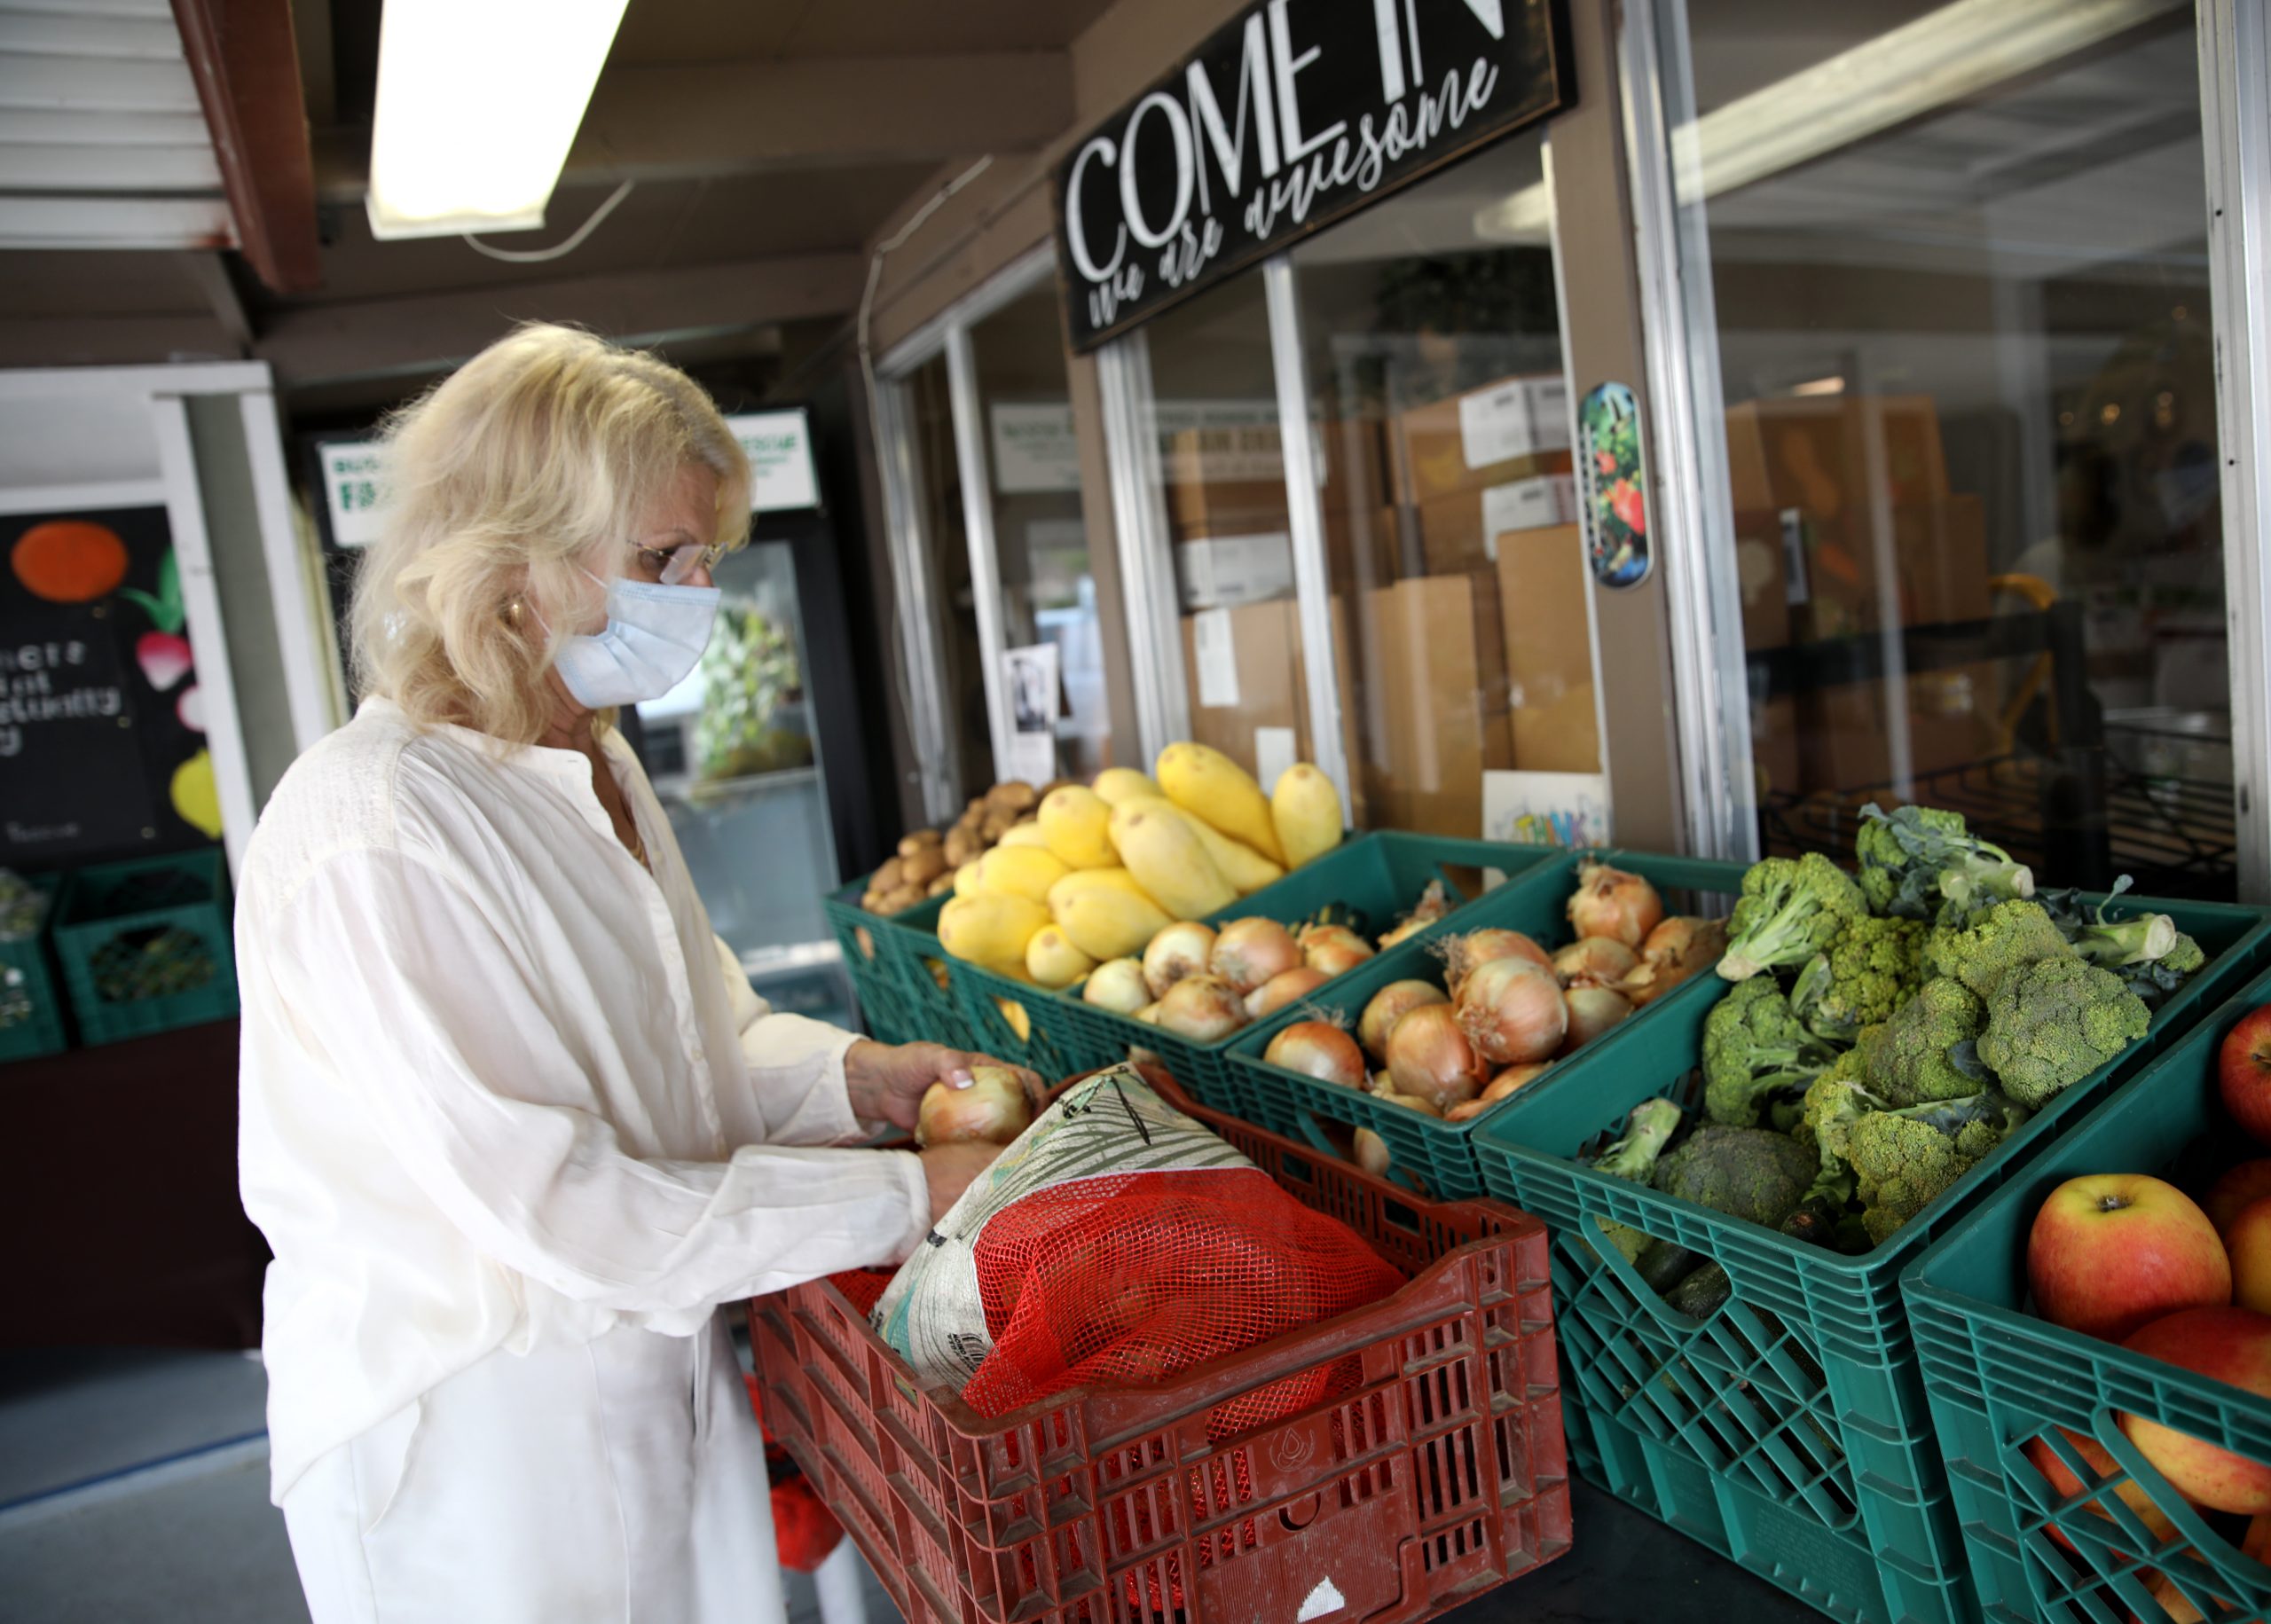 Local food groups work together to alleviate hunger during pandemic